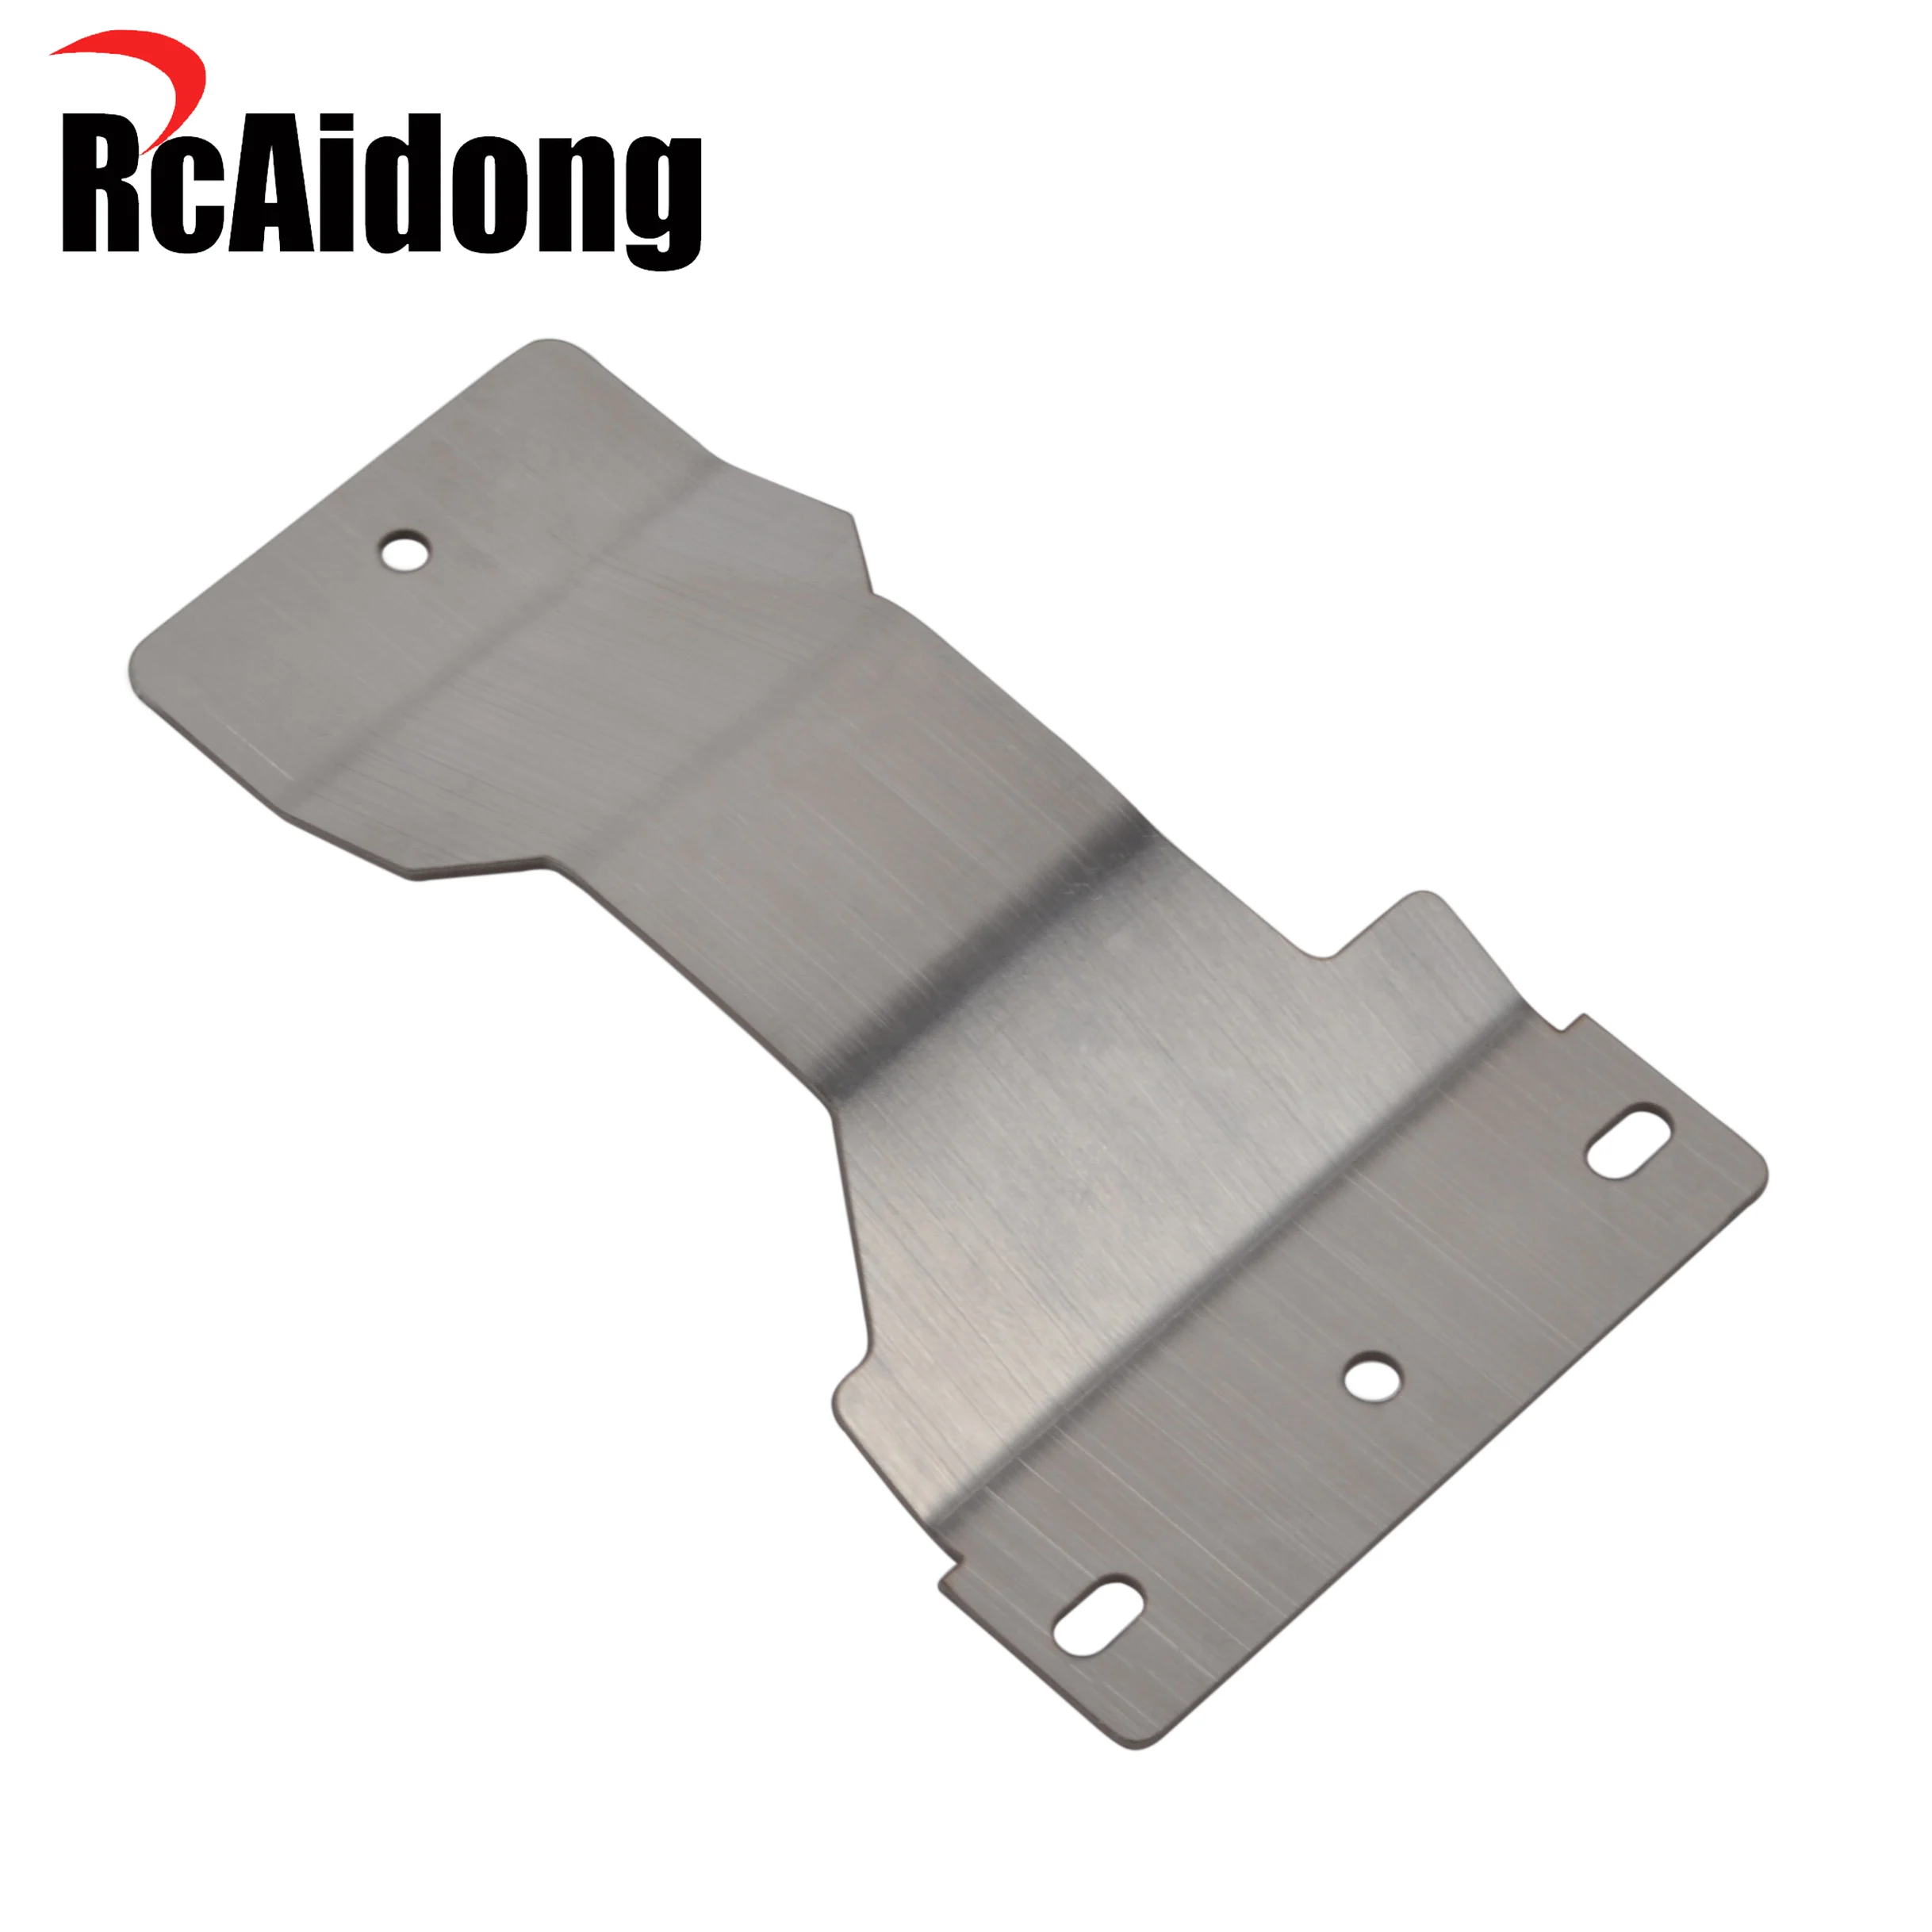 

RcAidong Aluminum Rear Lower Skid Chassis Plate for Tamiya 1/10 Sand Scorcher Champ Buggy SRB